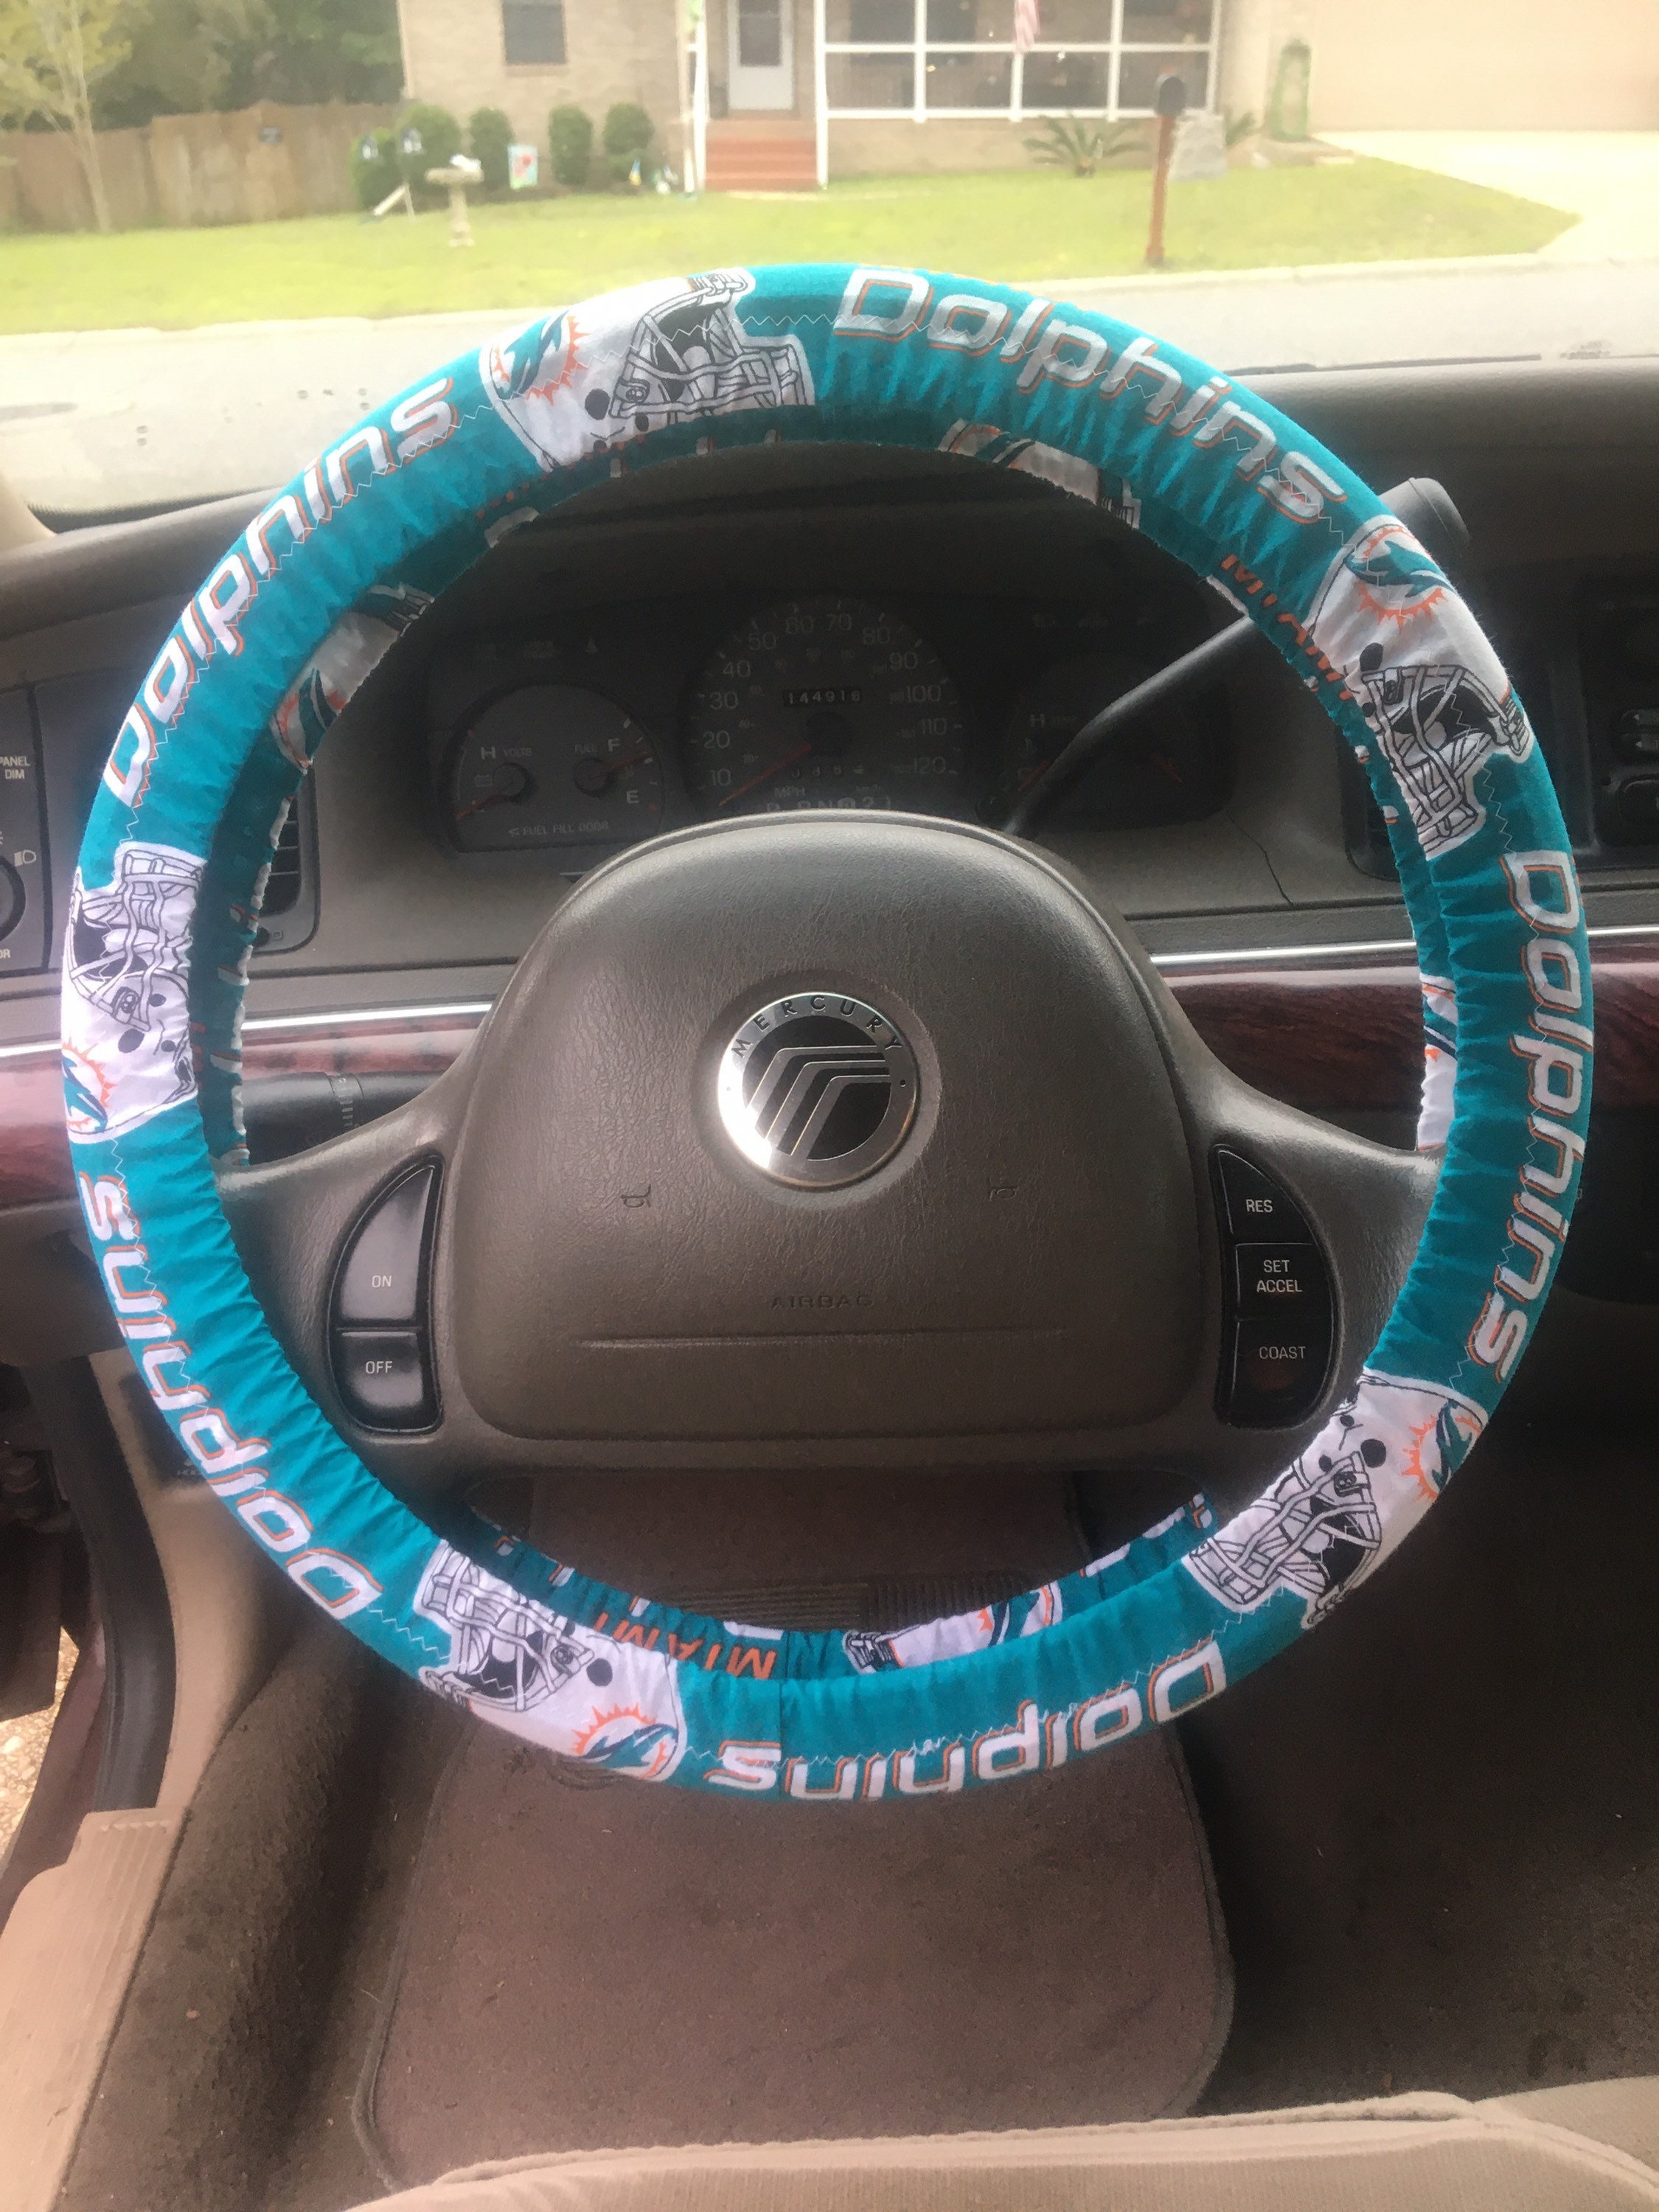 MIAMI DOLPHINS Steering Wheel Cover